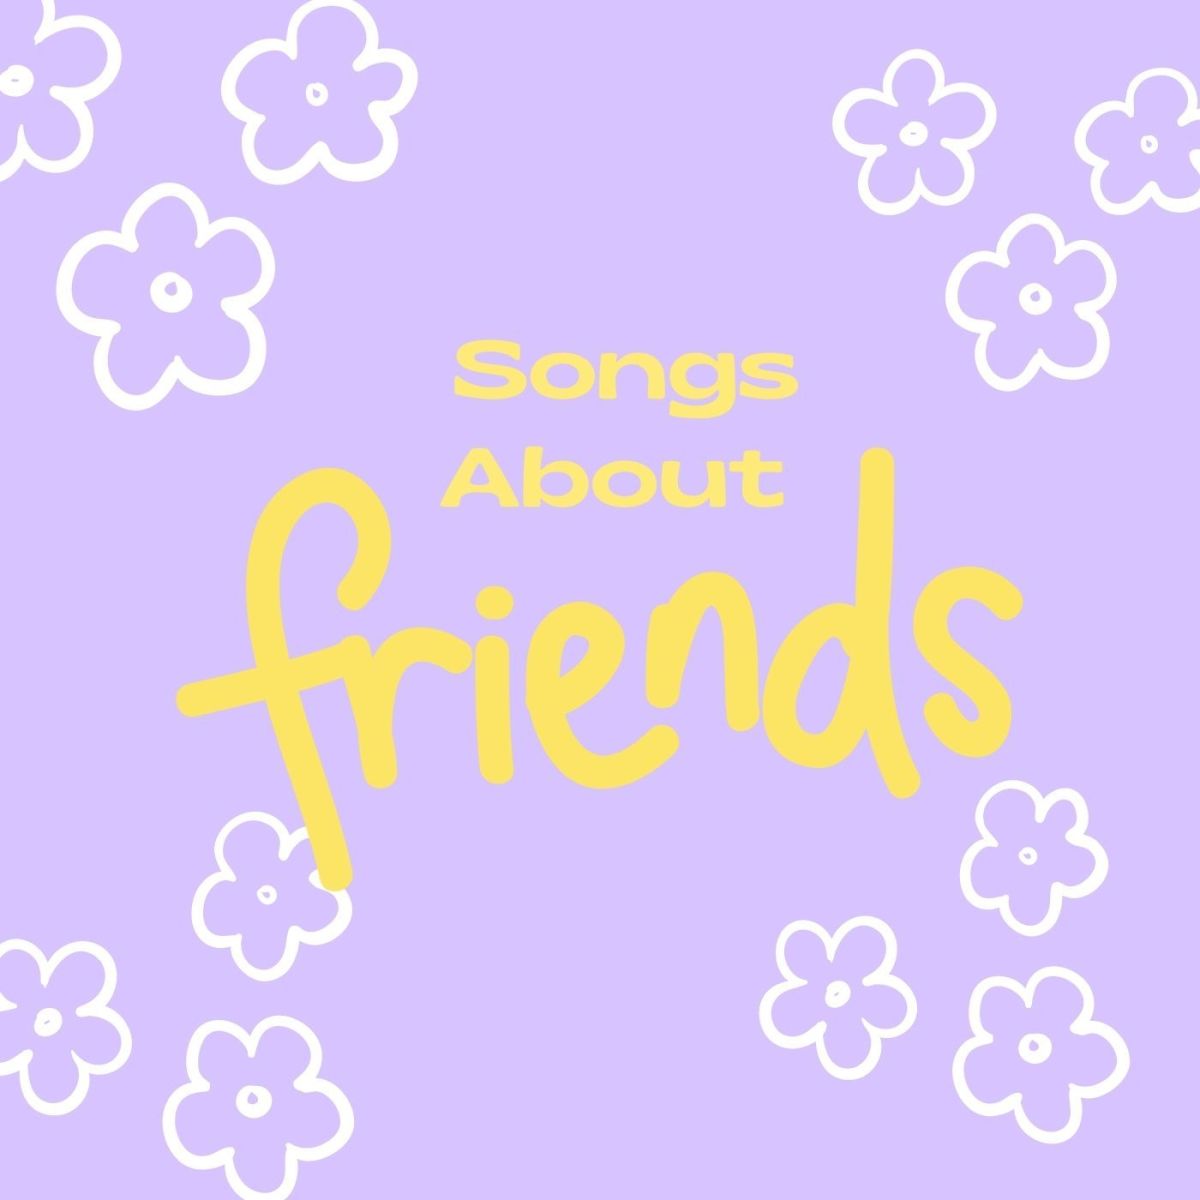 Top 10 Songs About Best Friends